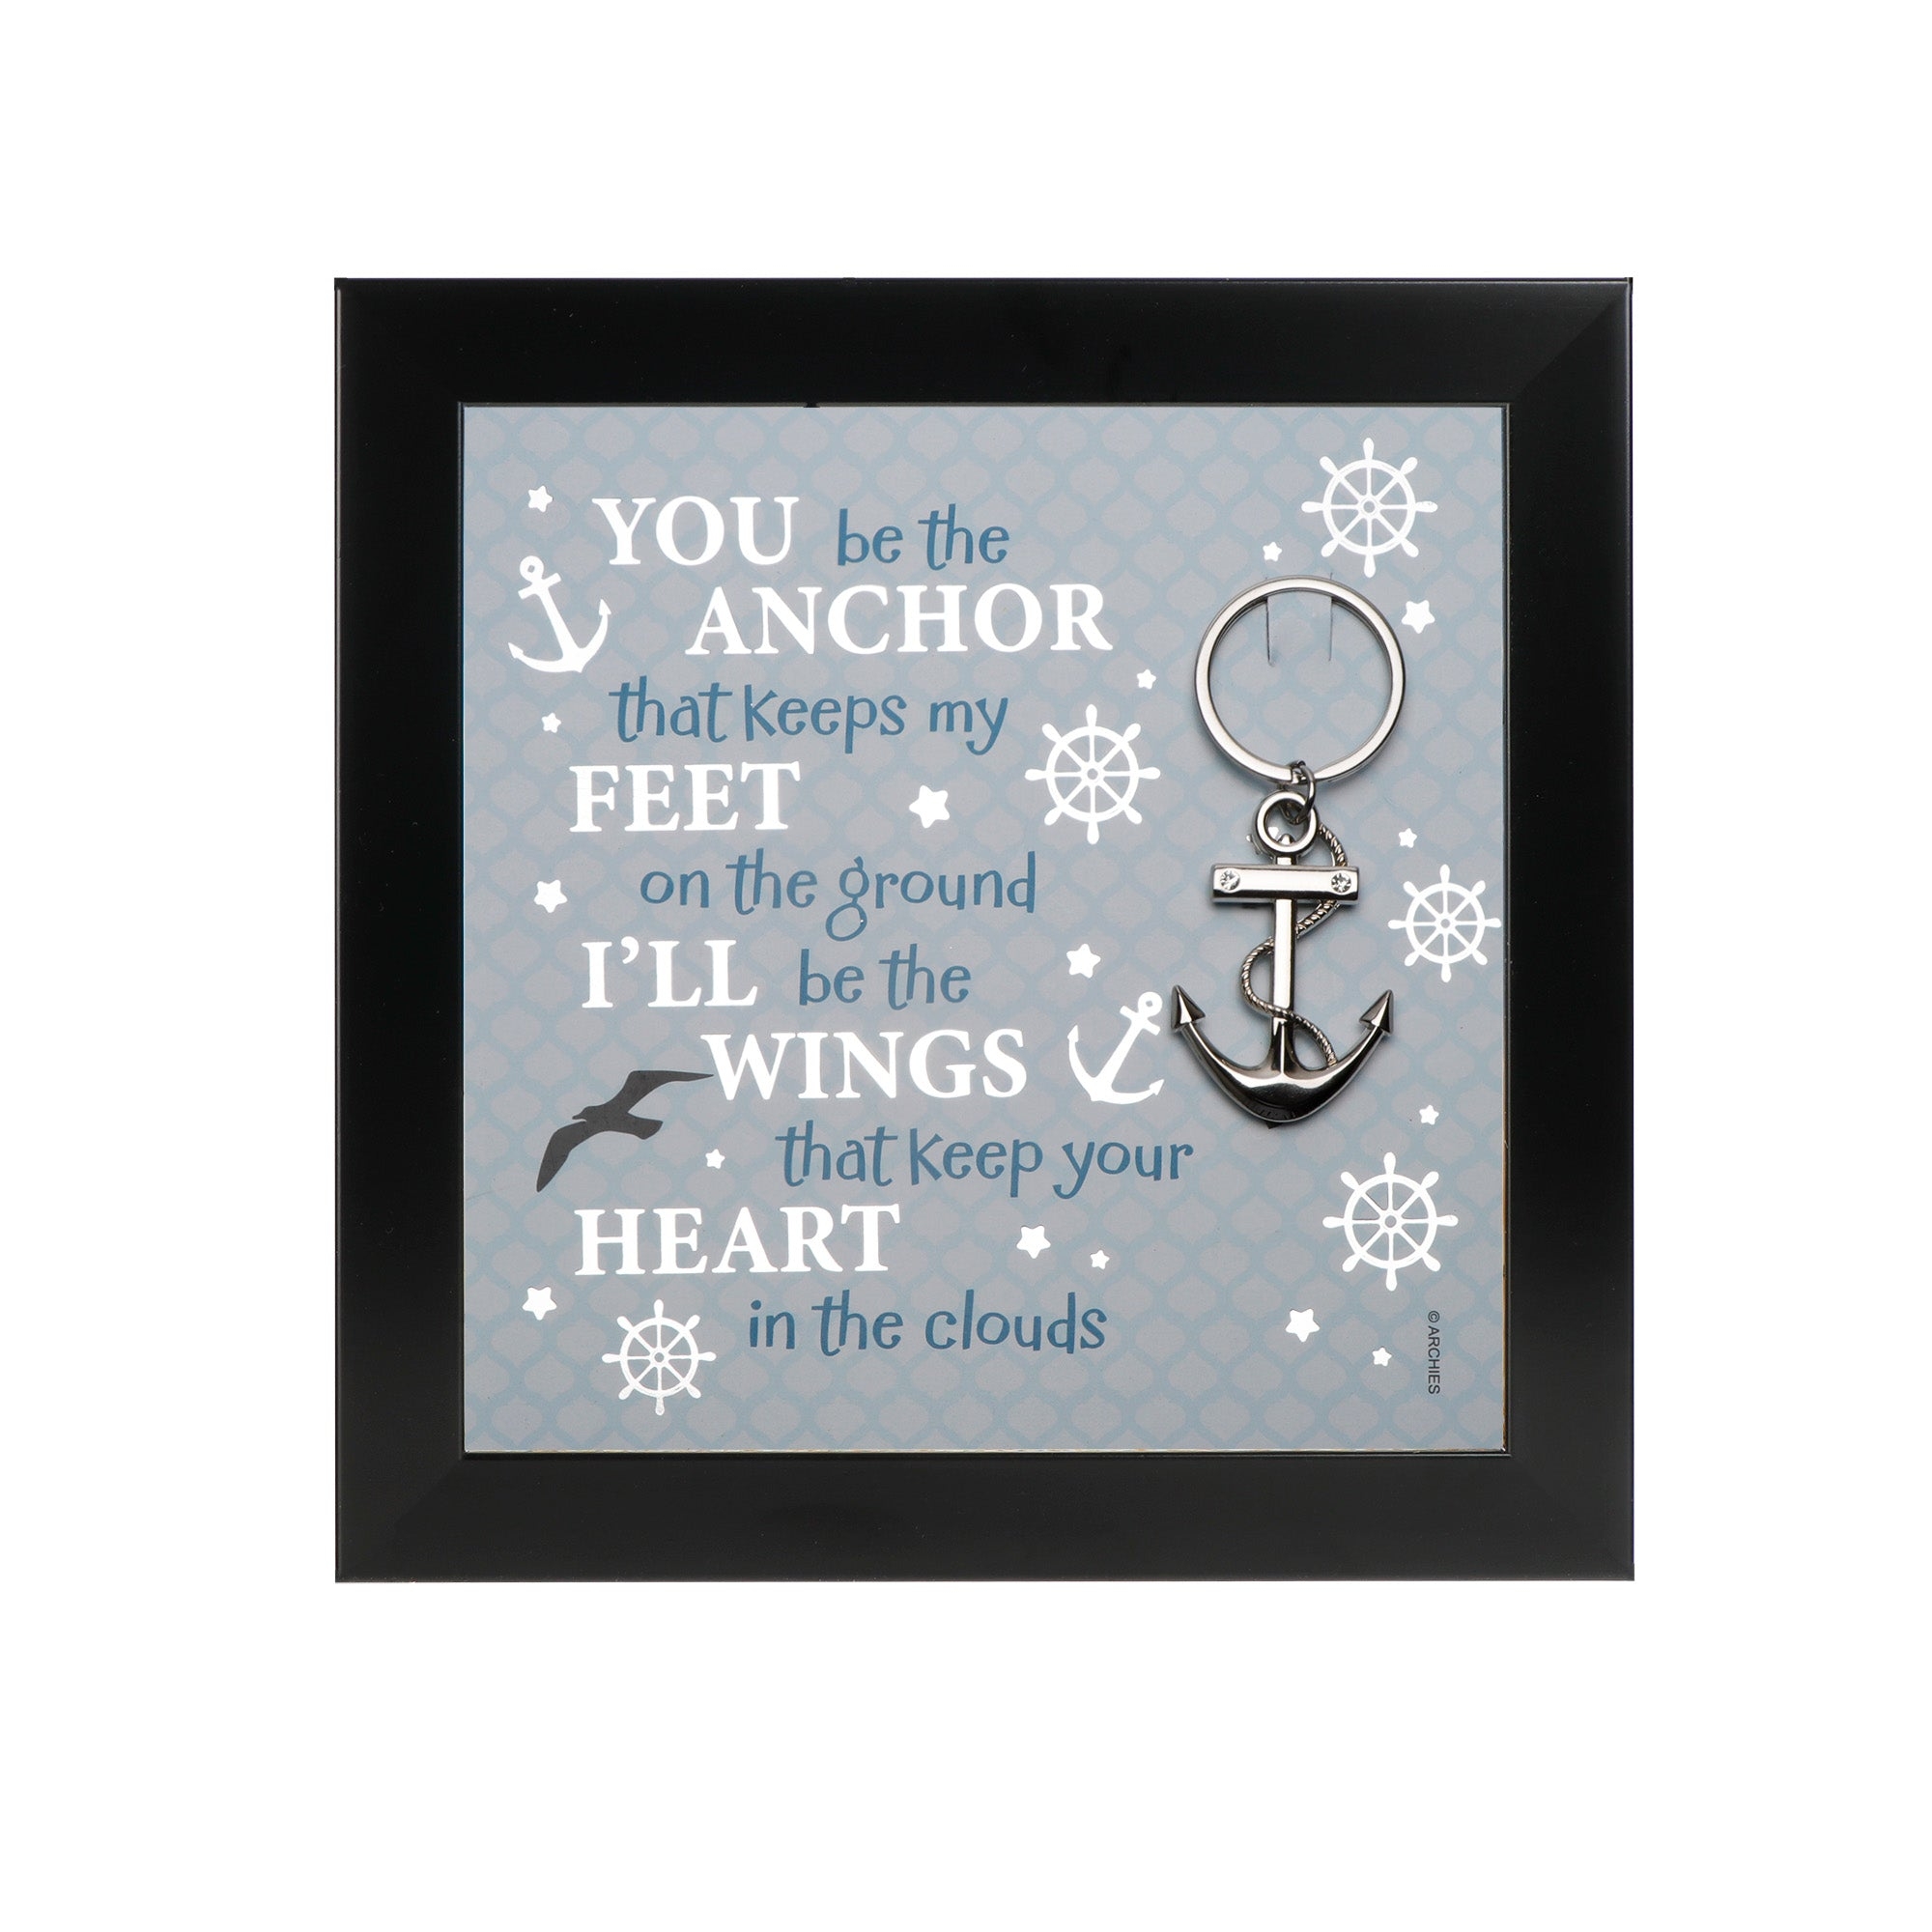 Archies | Archies KEEPSAKE QUOTATION- YOU BE THE ANCHOR For gifting and Home décor